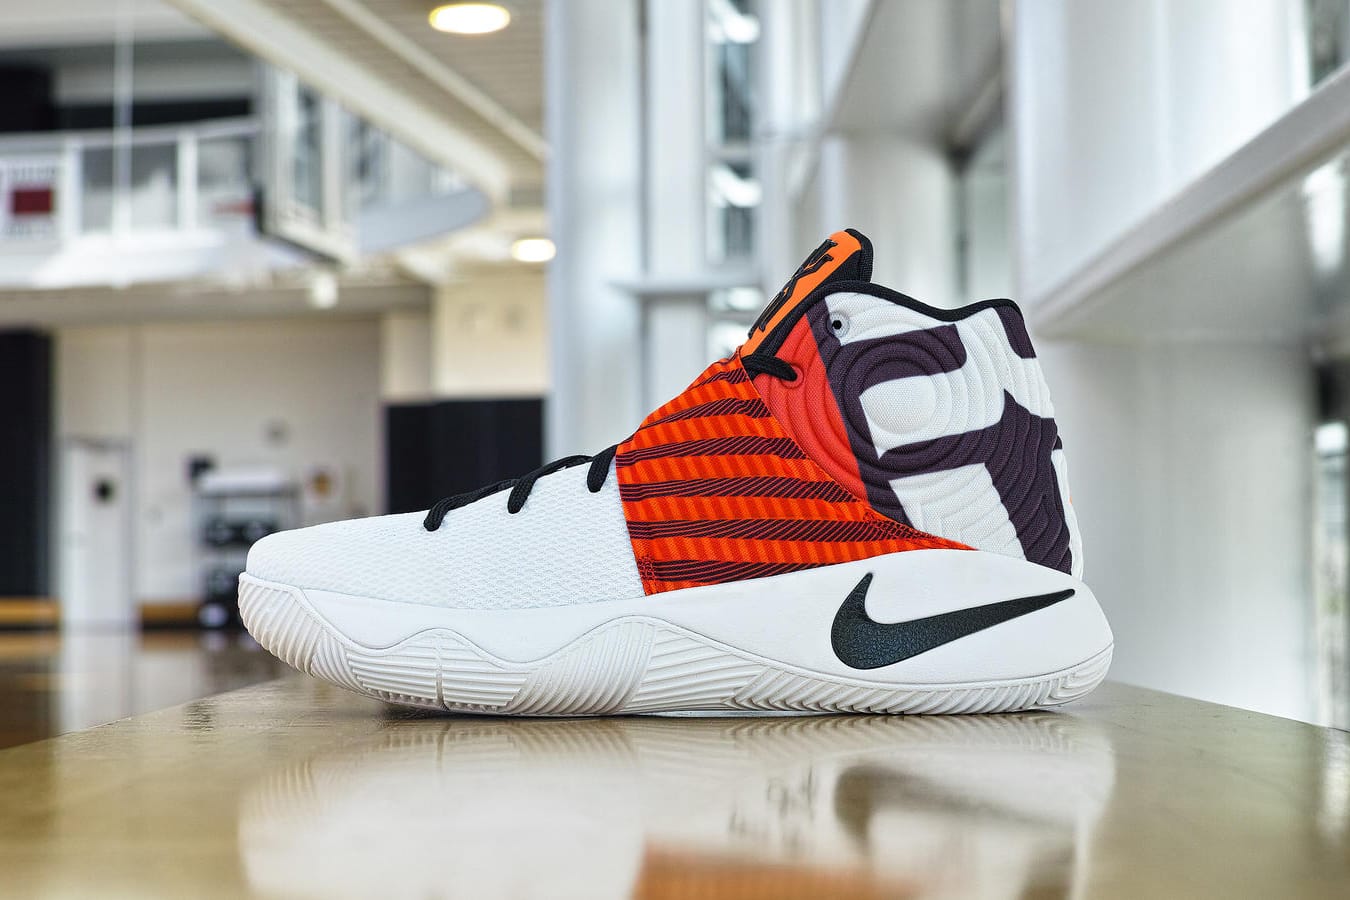 kyrie 2016 shoes